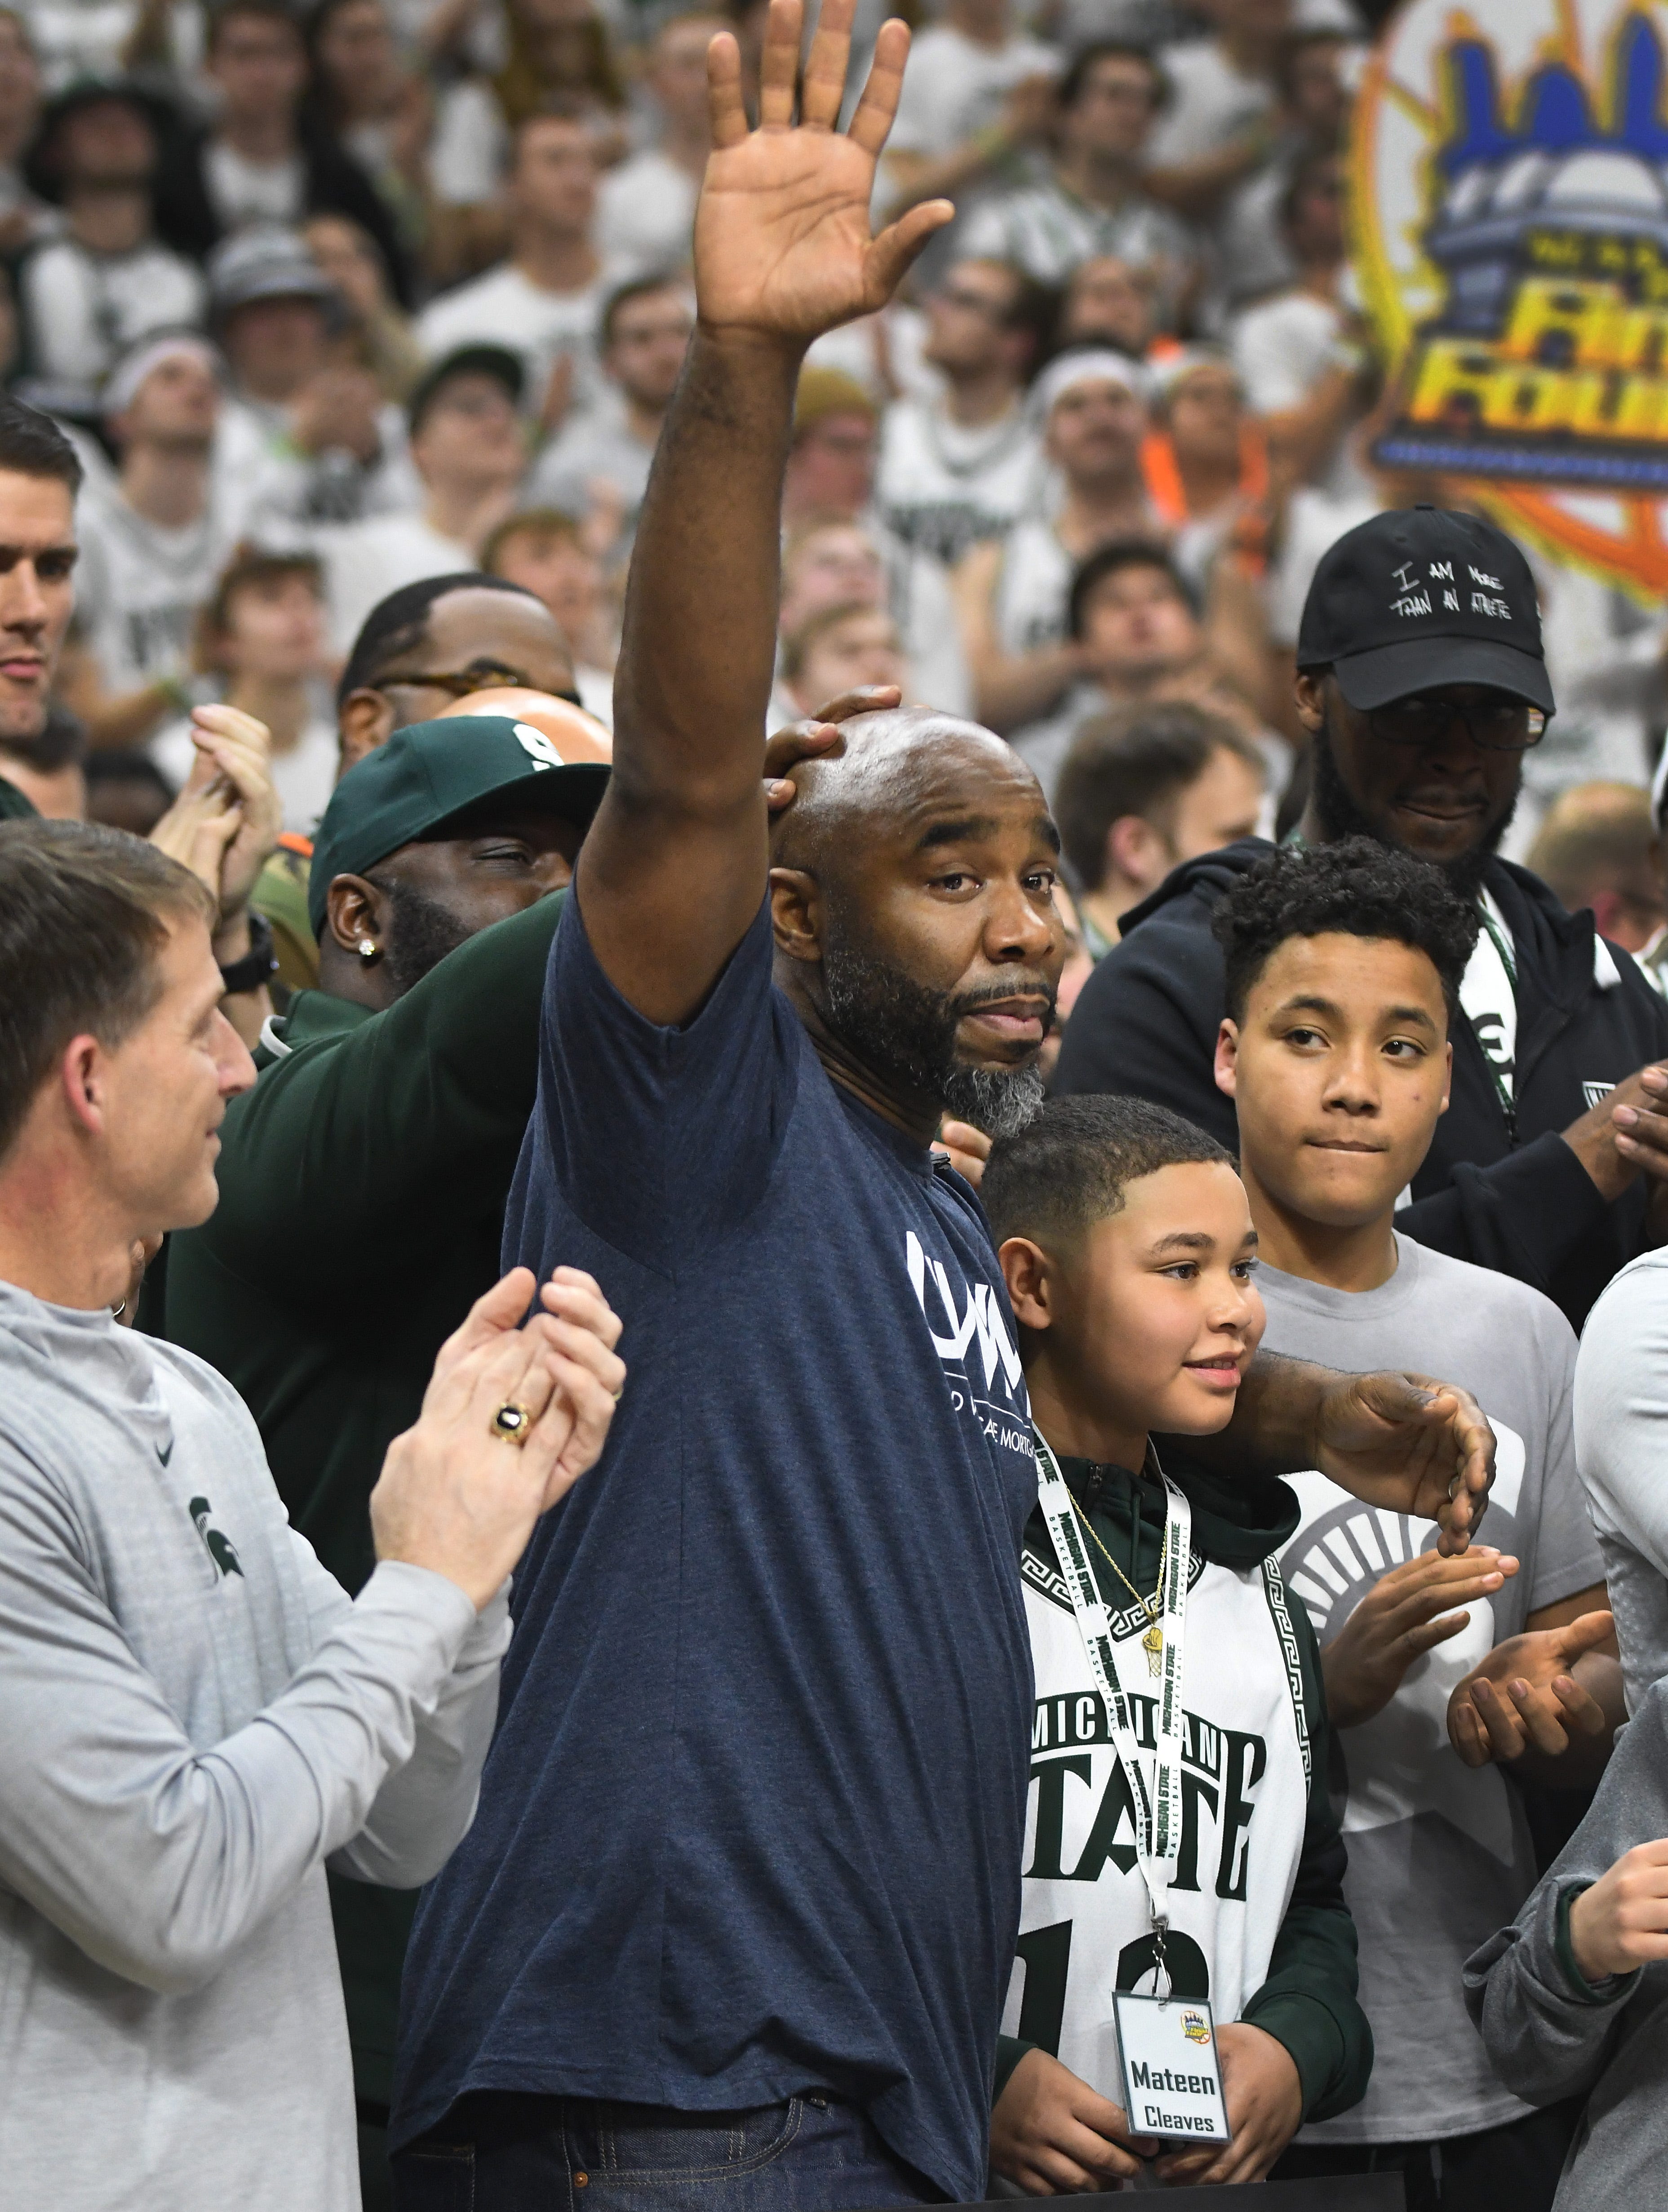 Michigan State 2000 championship team member Mateen Cleaves is introduced during a halftime ceremony at the Breslin Center this past season.